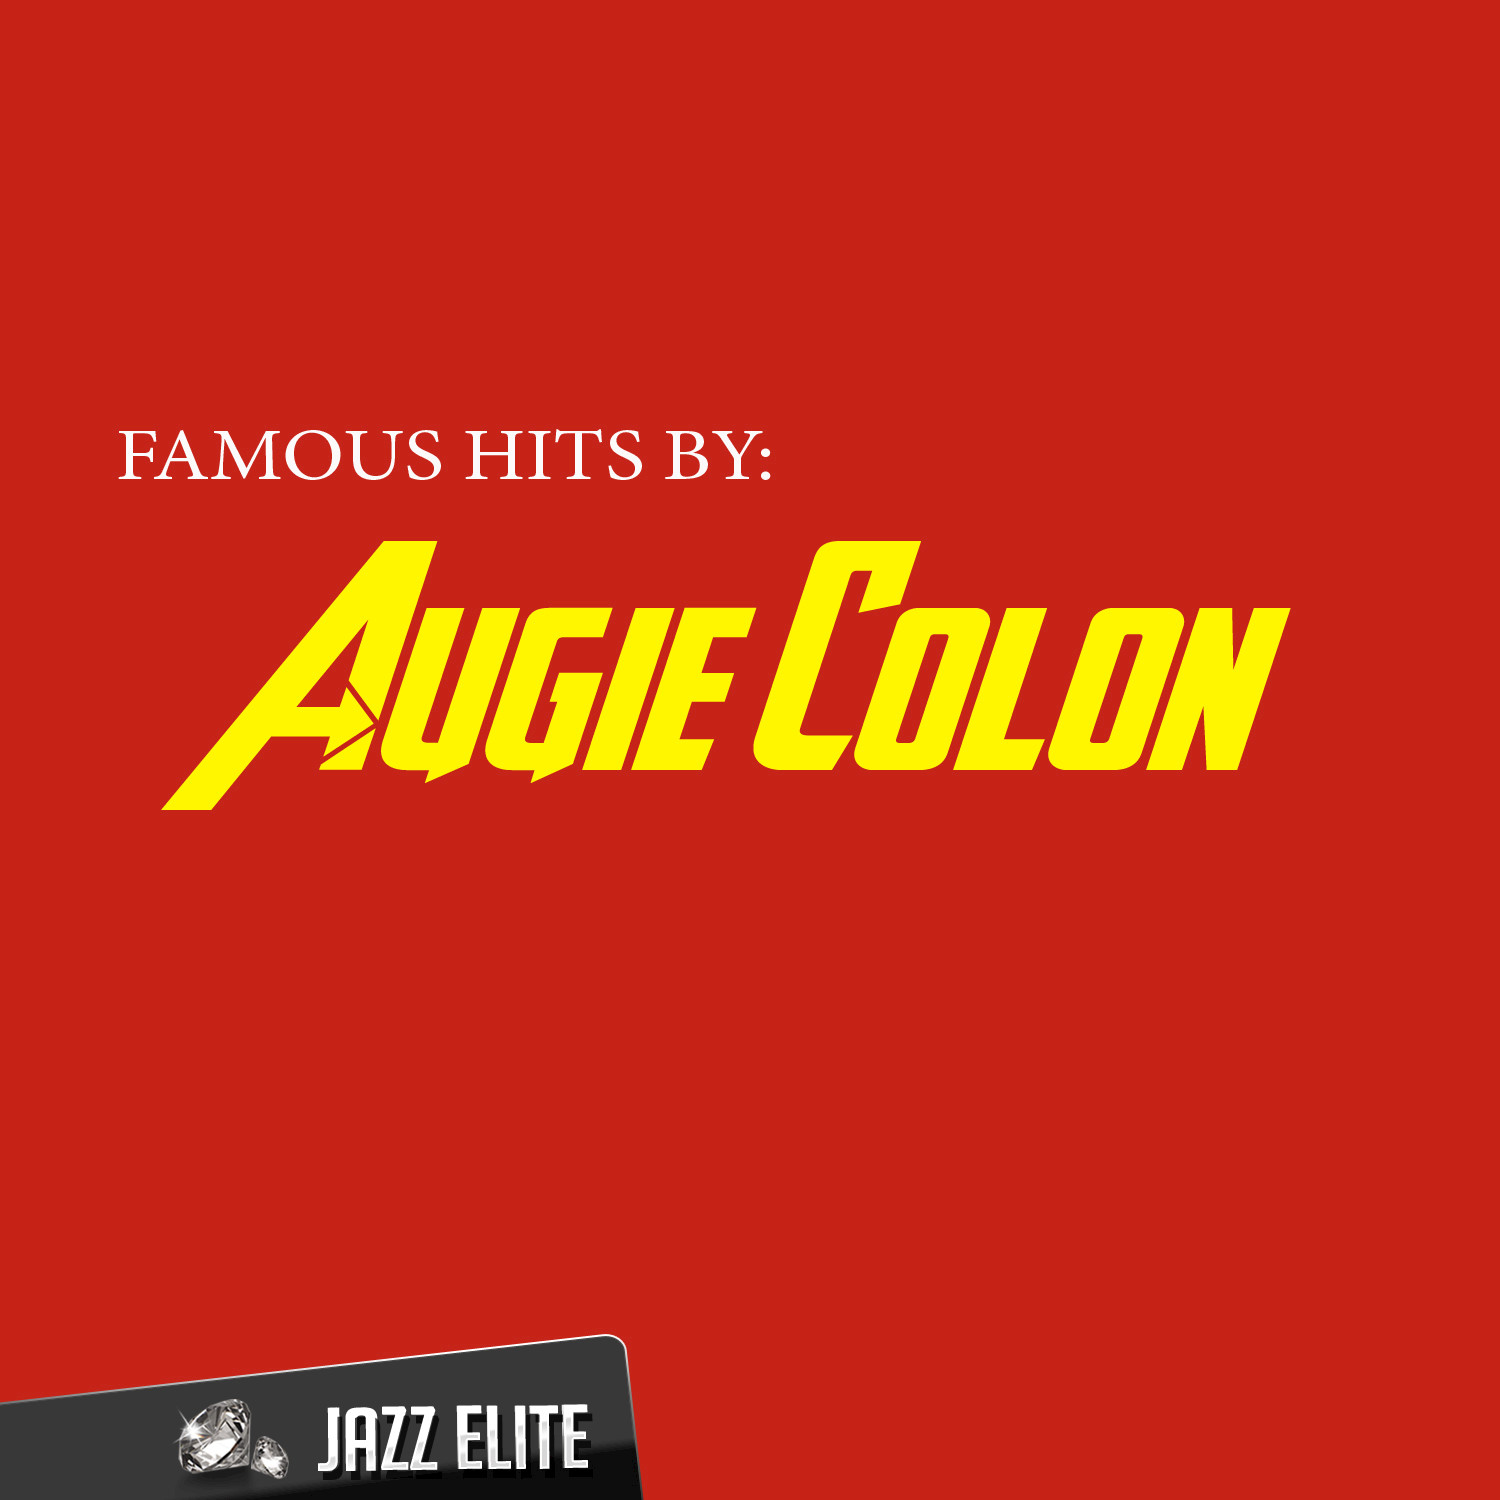 Famous Hits by Augie Colon